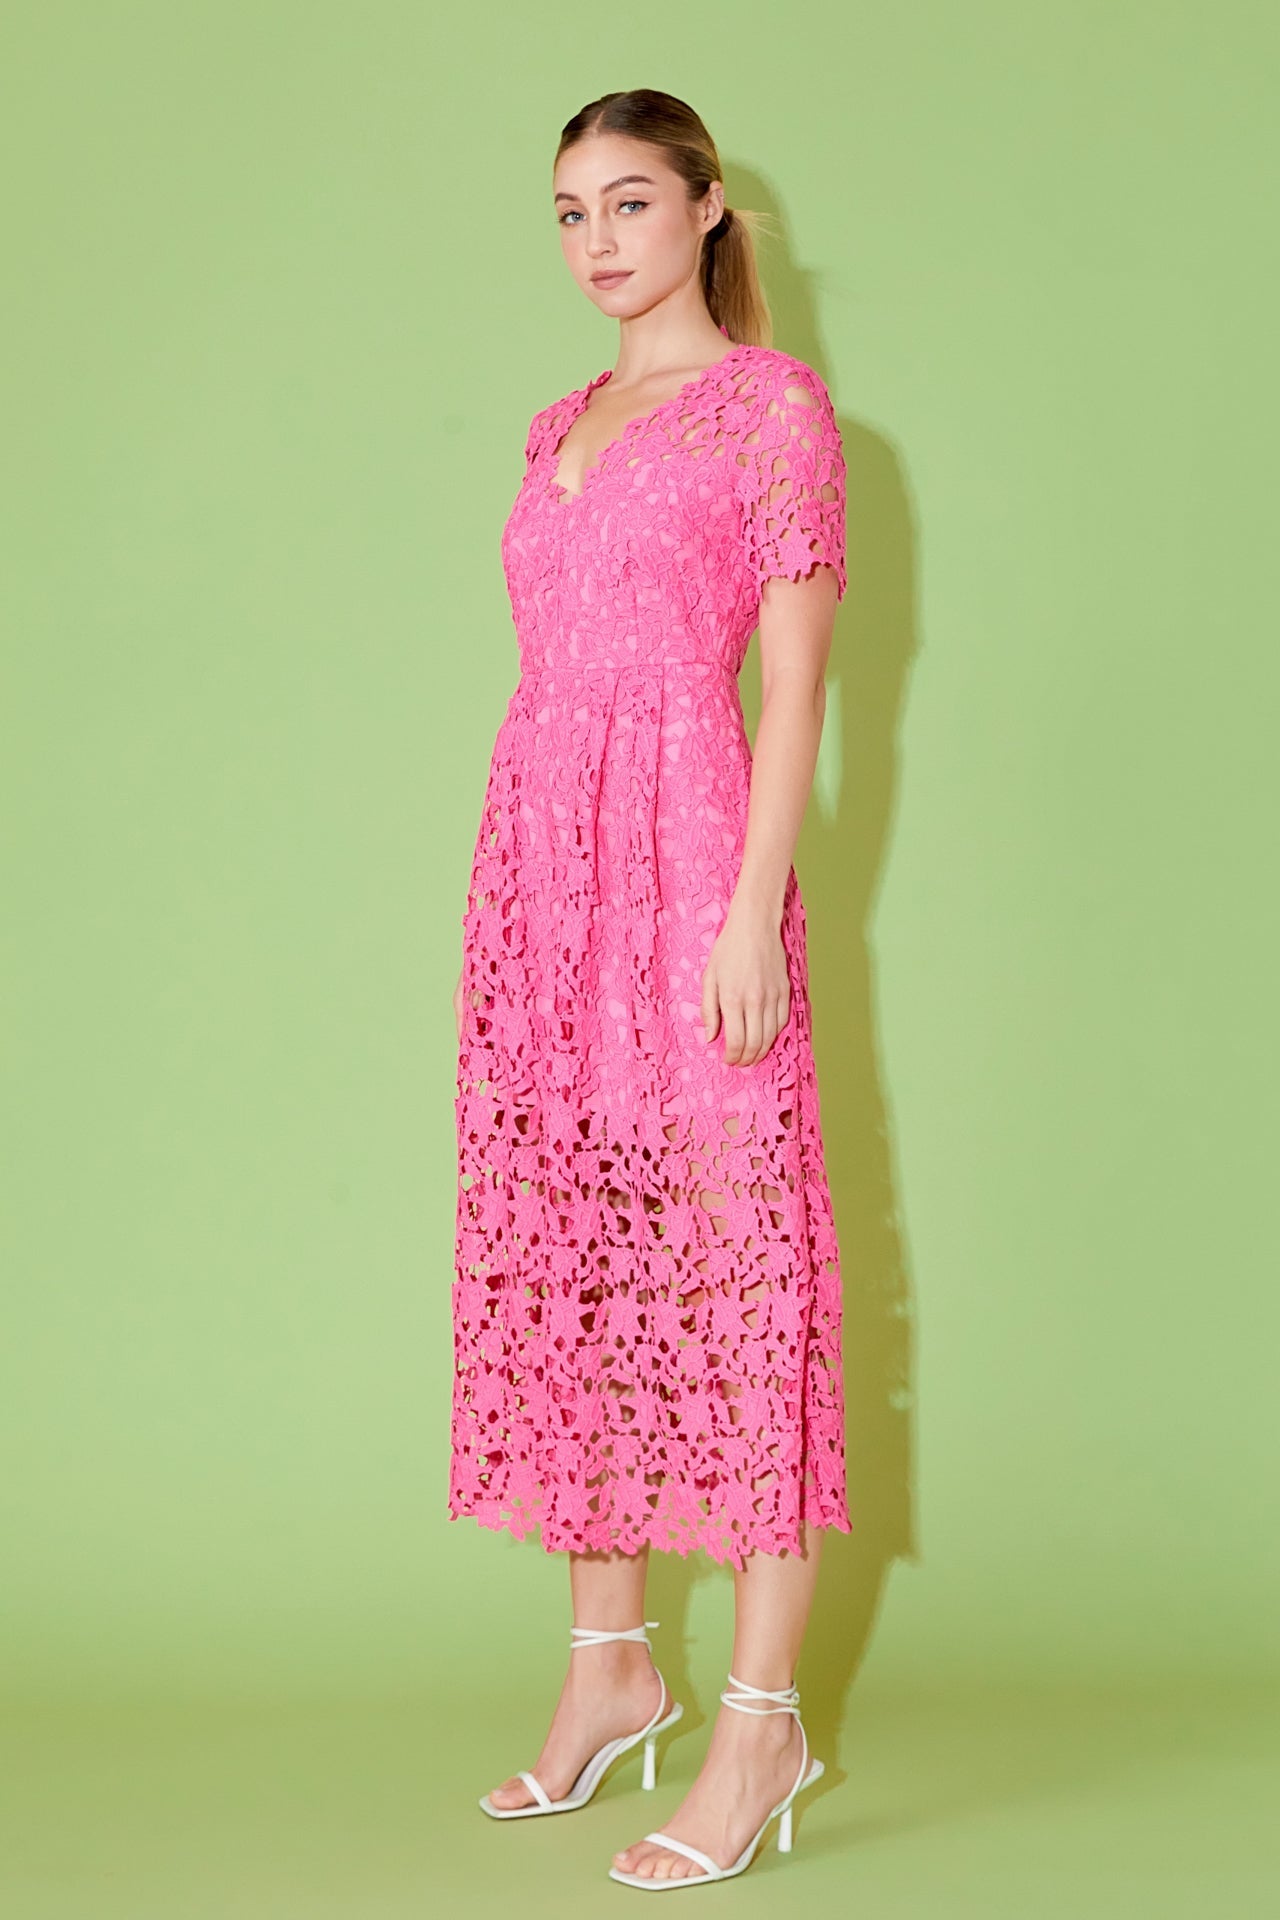 Isabella All Over Lace Midi Dress in Pink, pink over lace dress by endless rose 